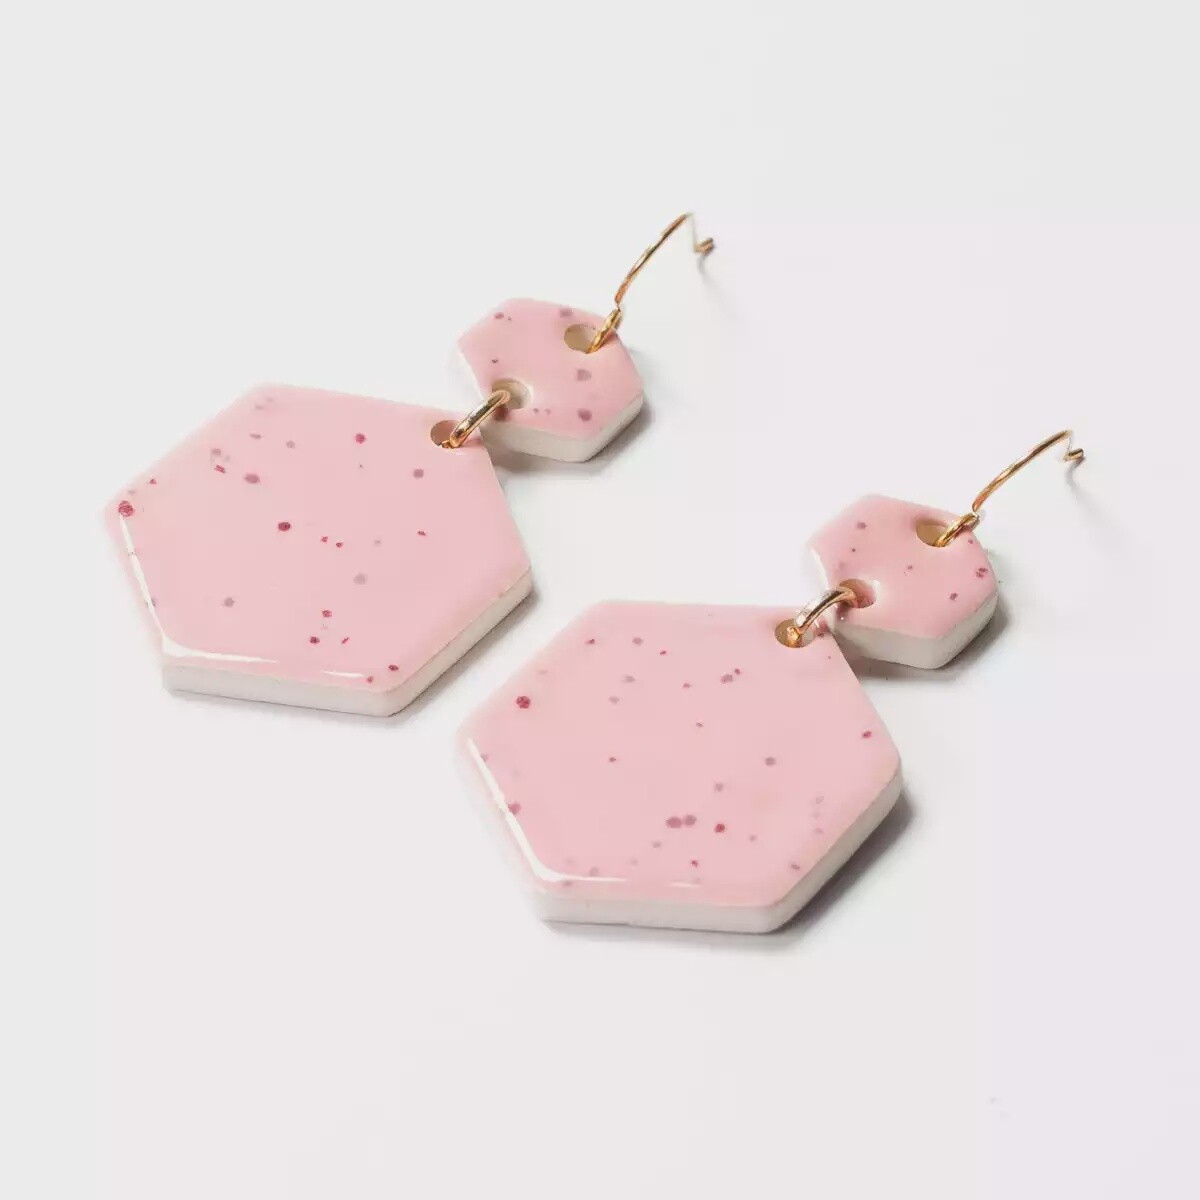 Ceramic Speckled Hexagon Drop Earrings - Pink by Clay Blanca